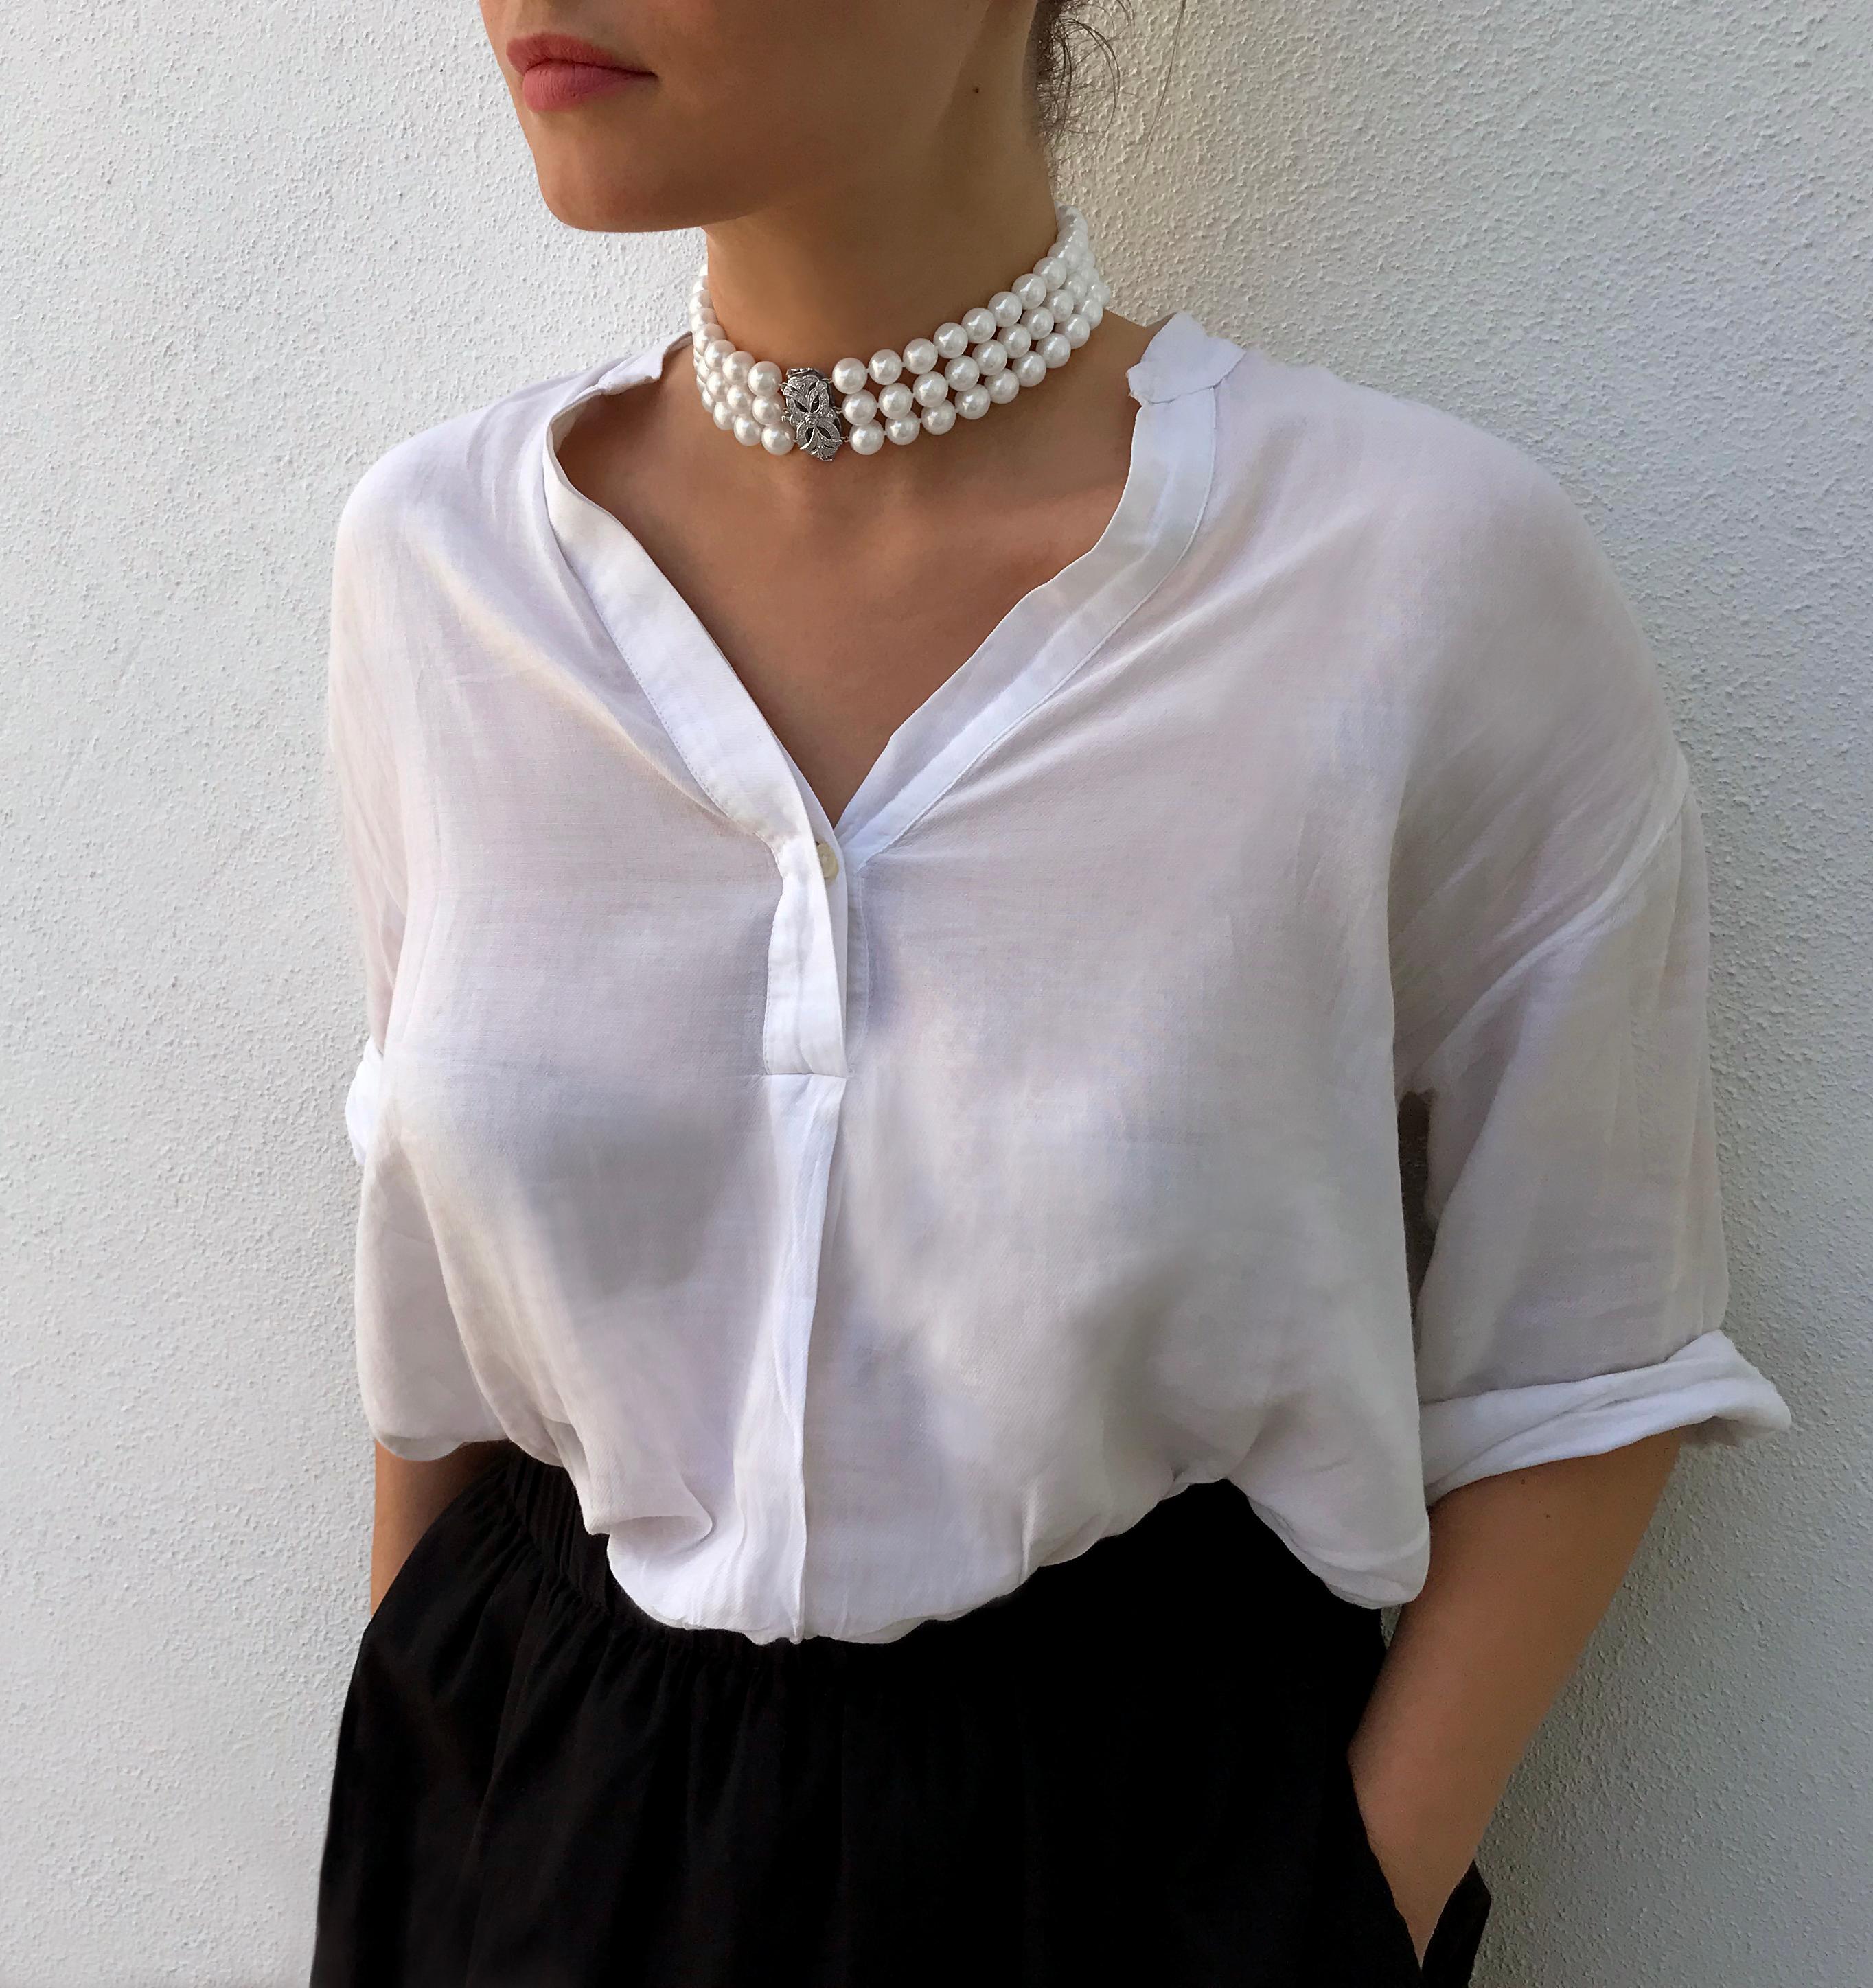 This stunning choker by Yoko London features three rows of lustrous Cultured Freshwater Pearls, which have each been hand selected by our Pearl Experts. The Pearls are secured to an intricate Diamond set 18 Karat White Gold clasp, which is